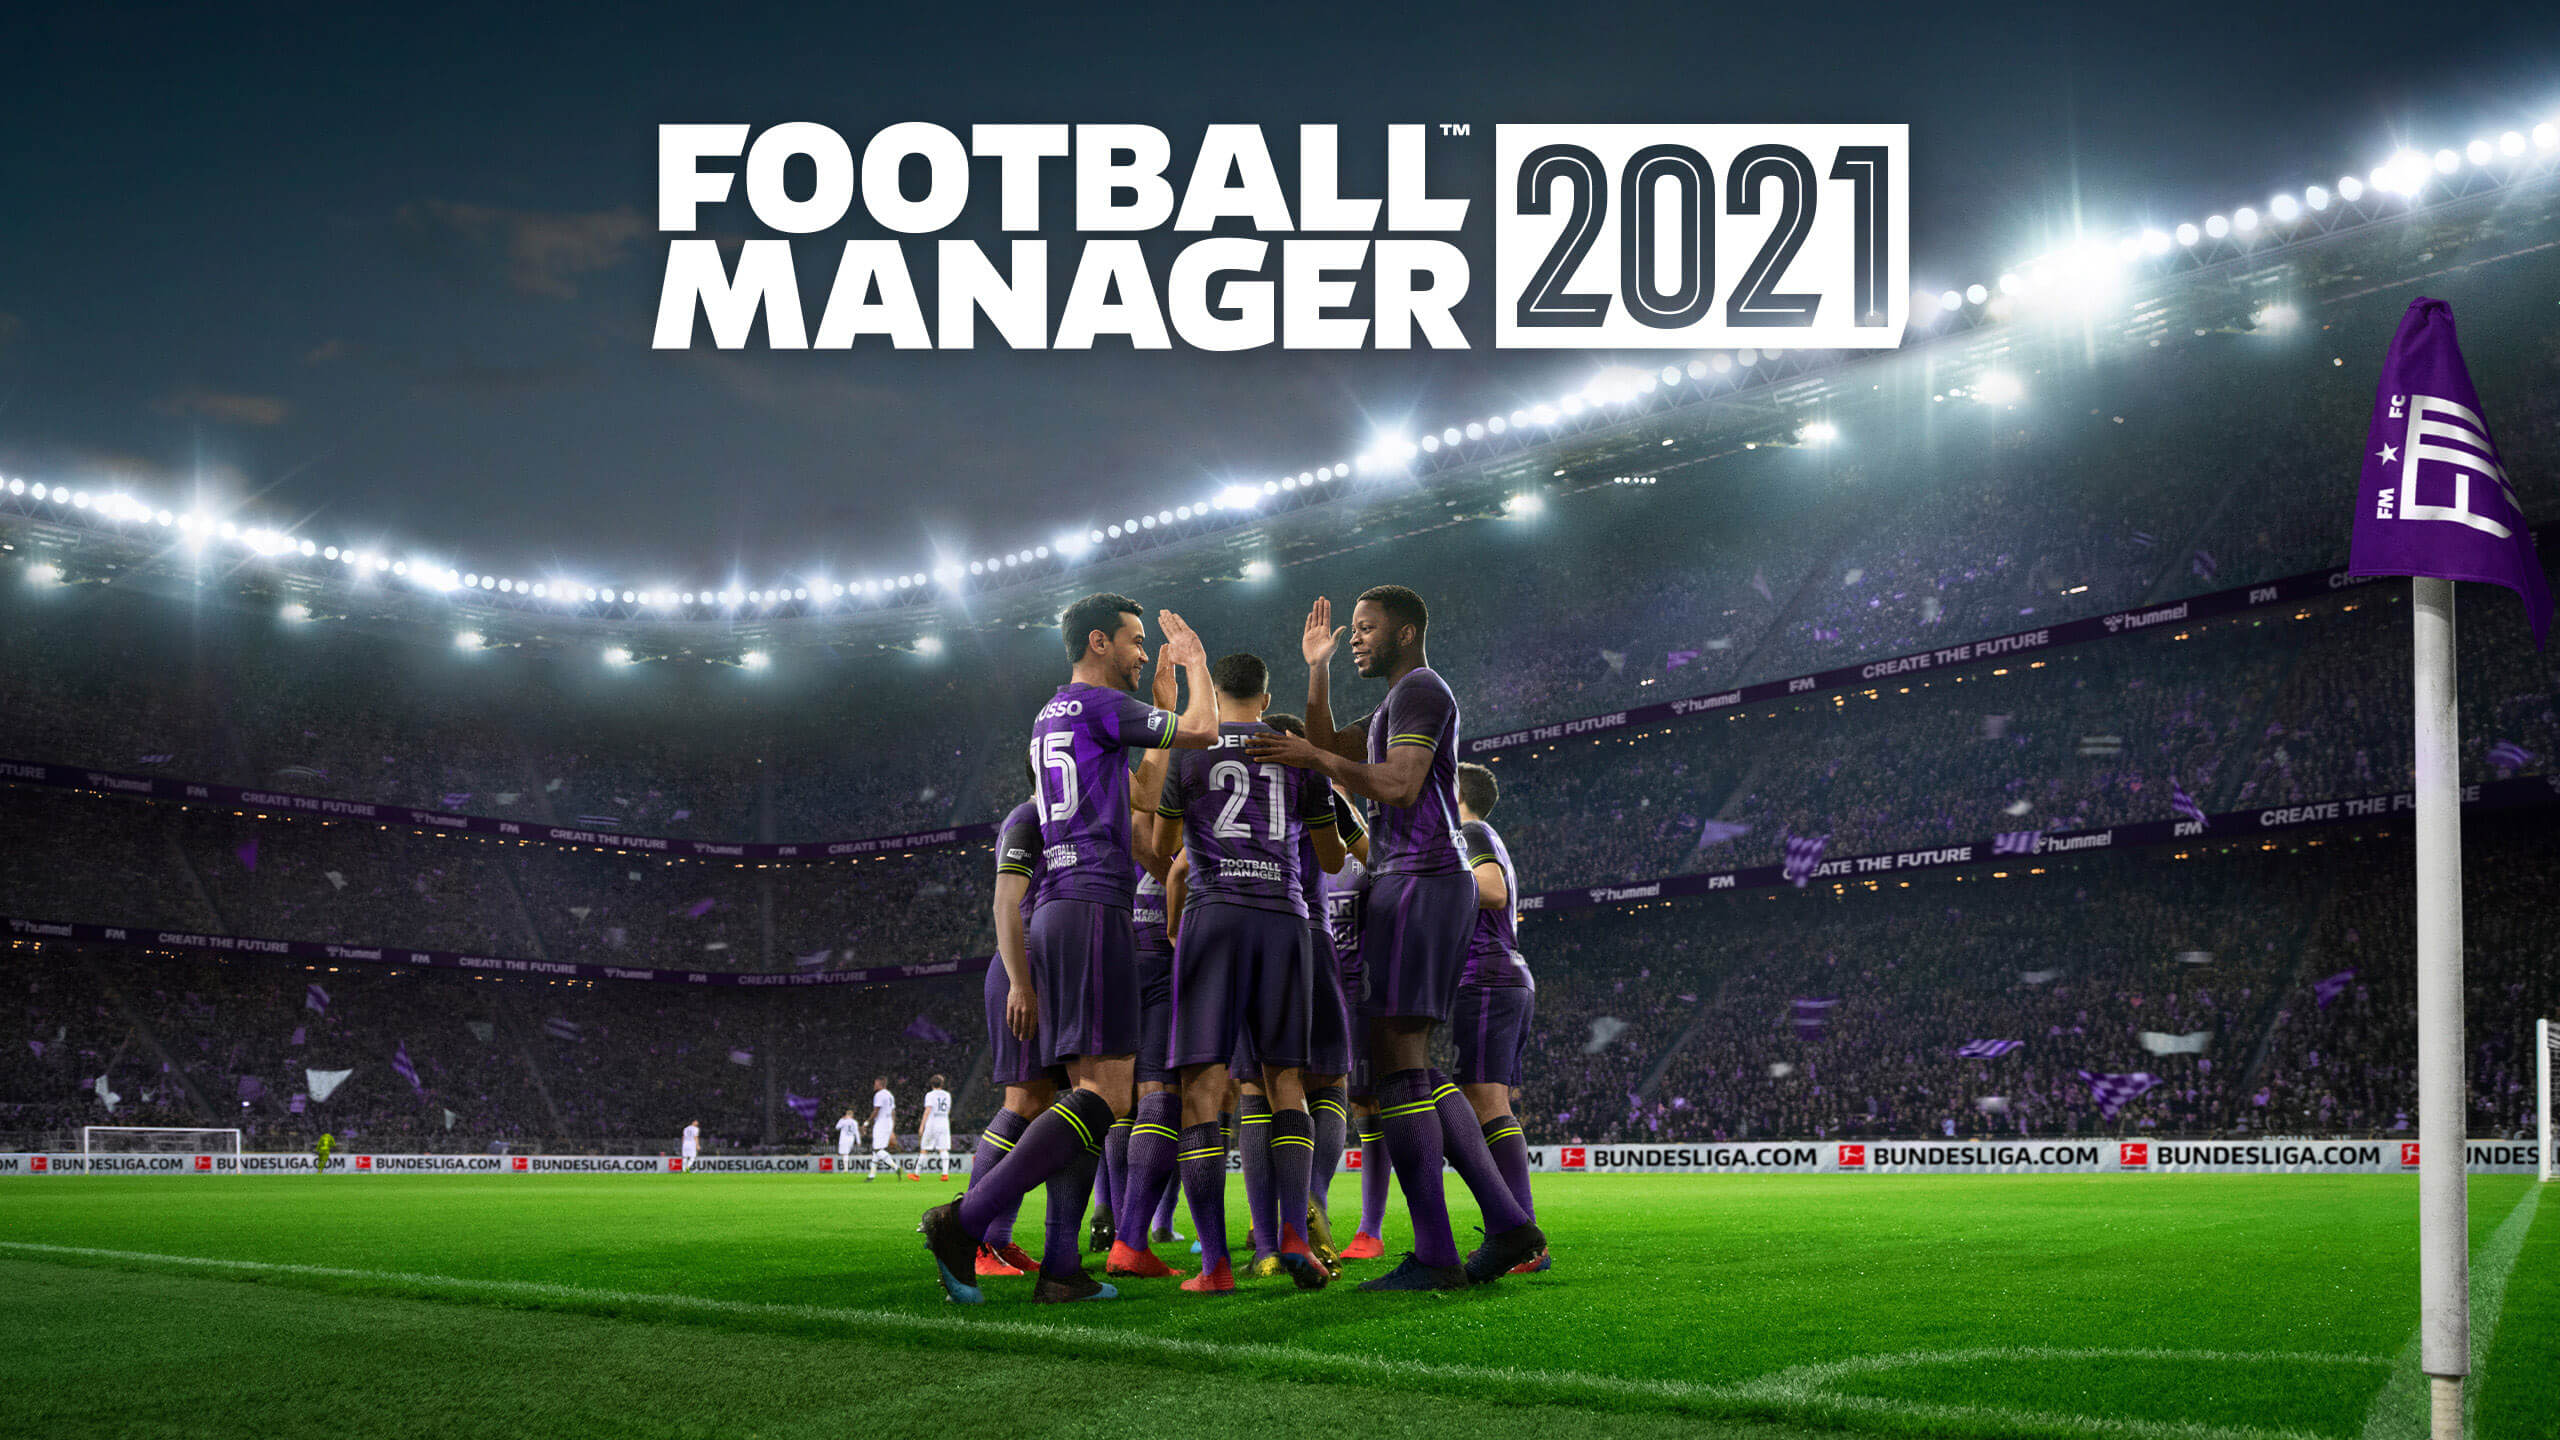 Football Manager 2021 Xbox Version Full Game Free Download